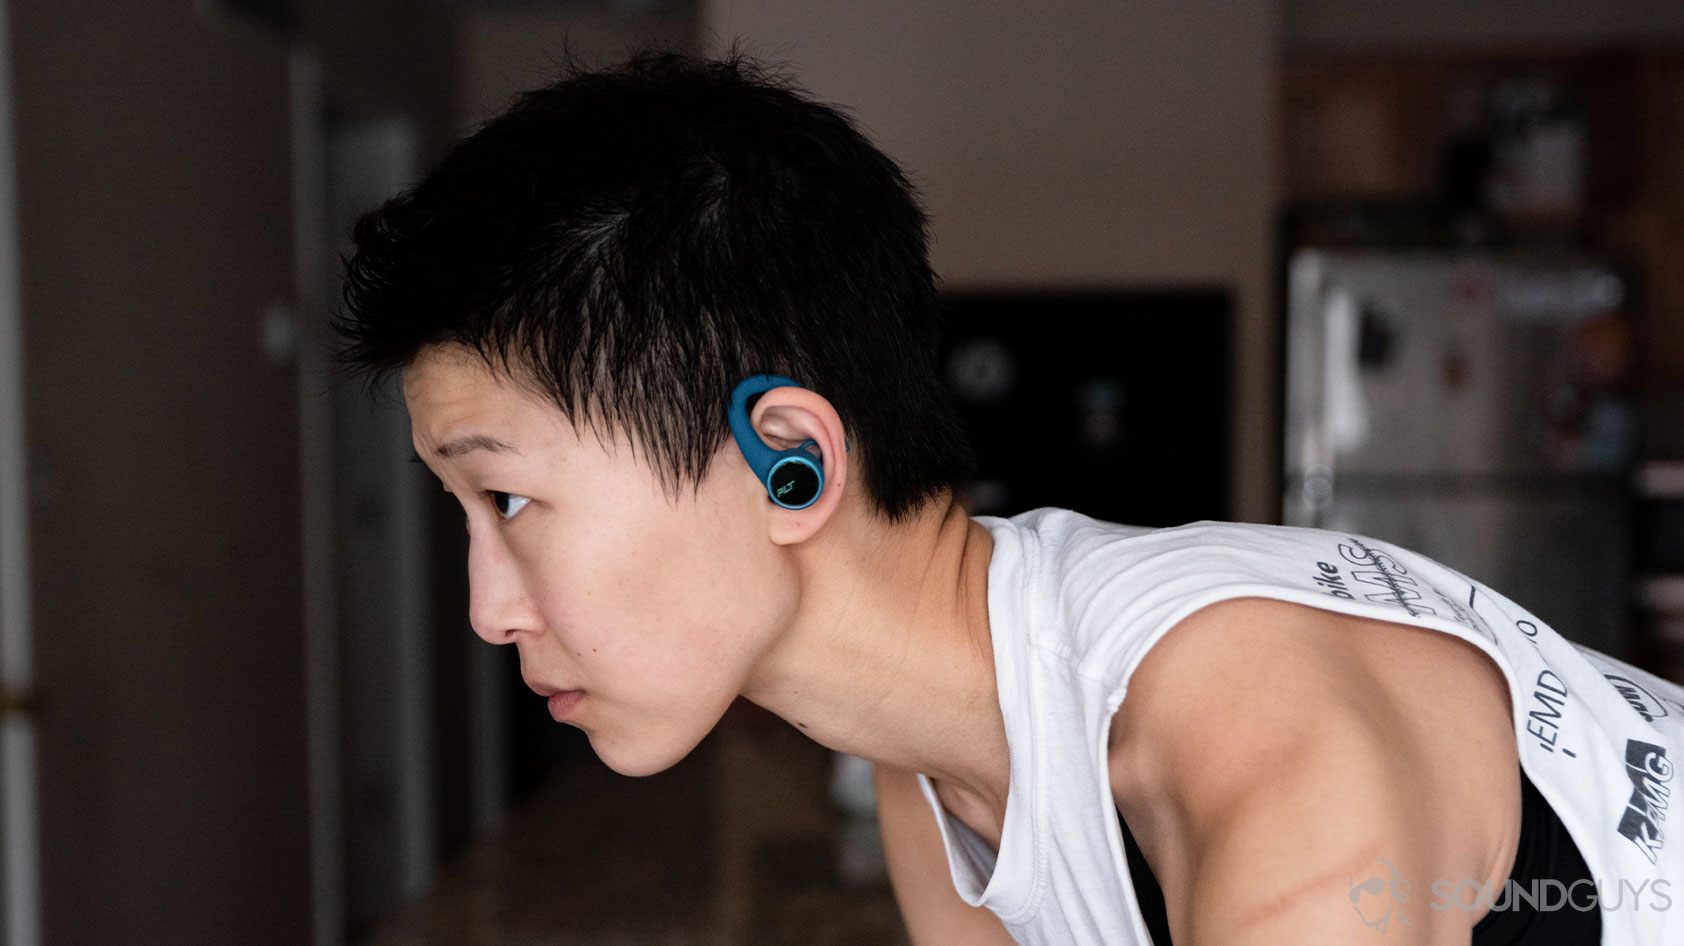 A picture of the Plantronics BackBeat Fit 3200 true wireless workout earbuds worn by a woman on a bike in profile.